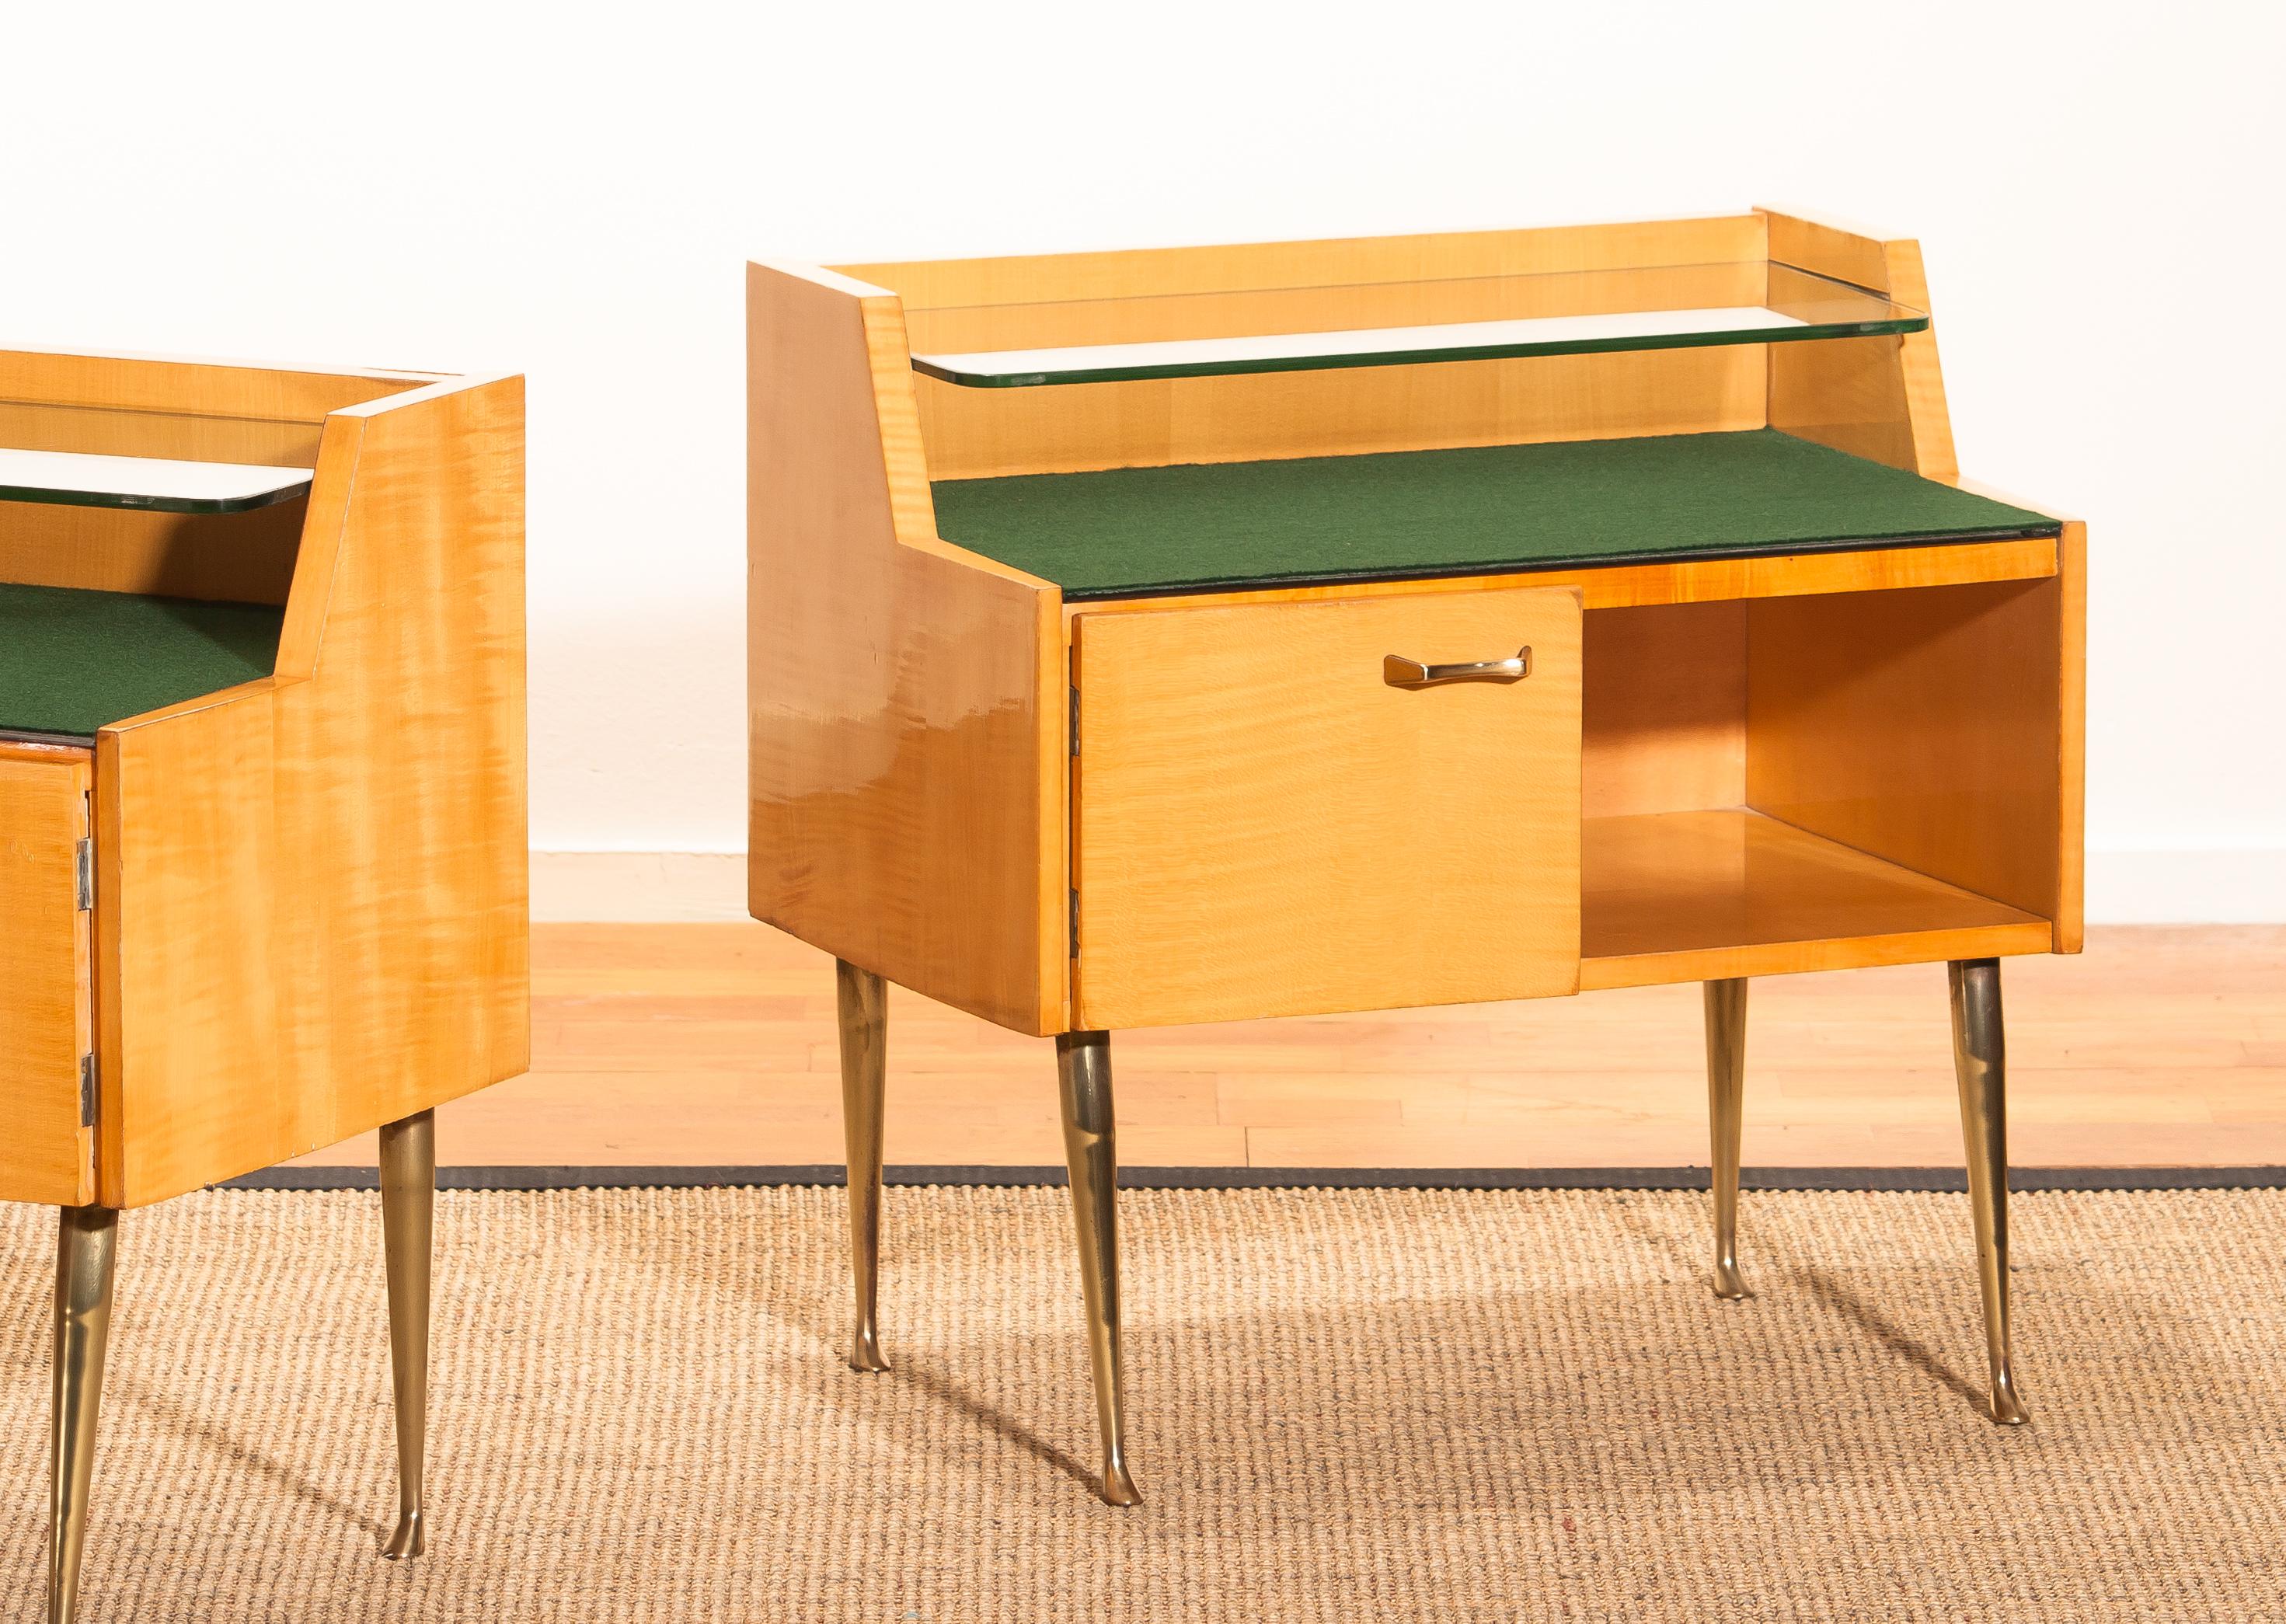 1950s, Pair of Italian Nightstands in Maple with Brass Legs by Paolo Buffa 4